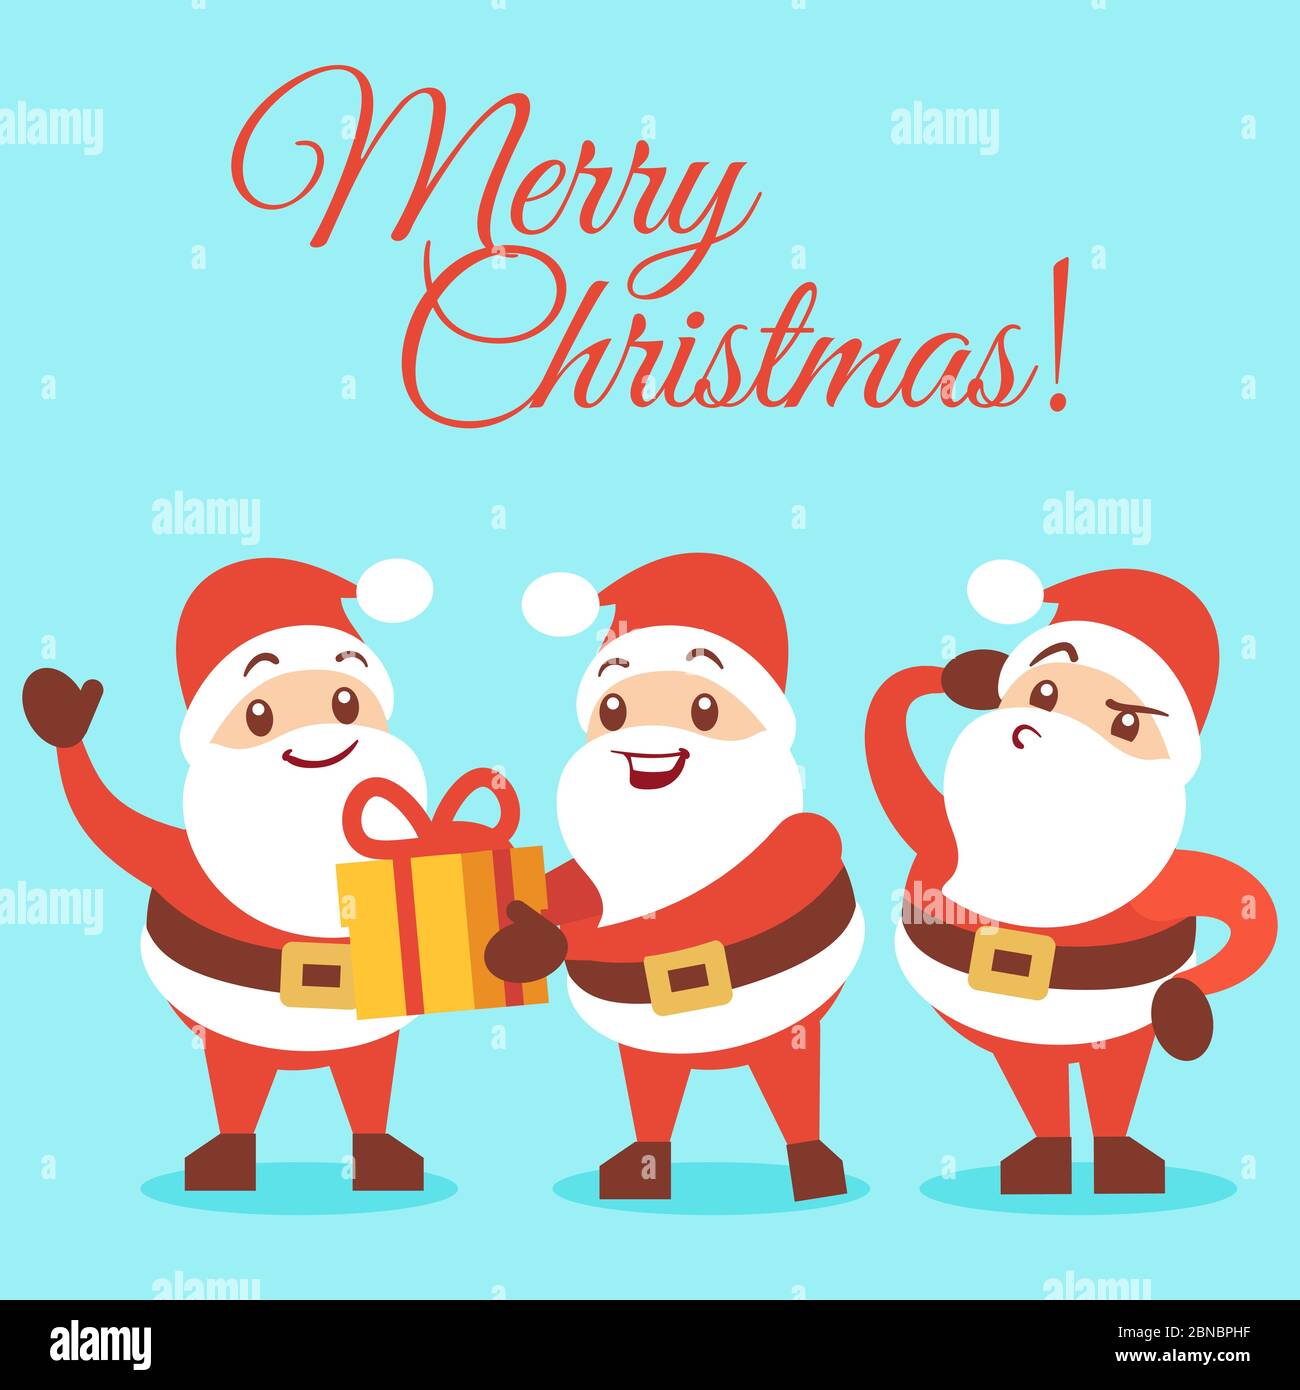 Merry Christmas background with emotional Santa cartoon characters of group illustration Stock Vector